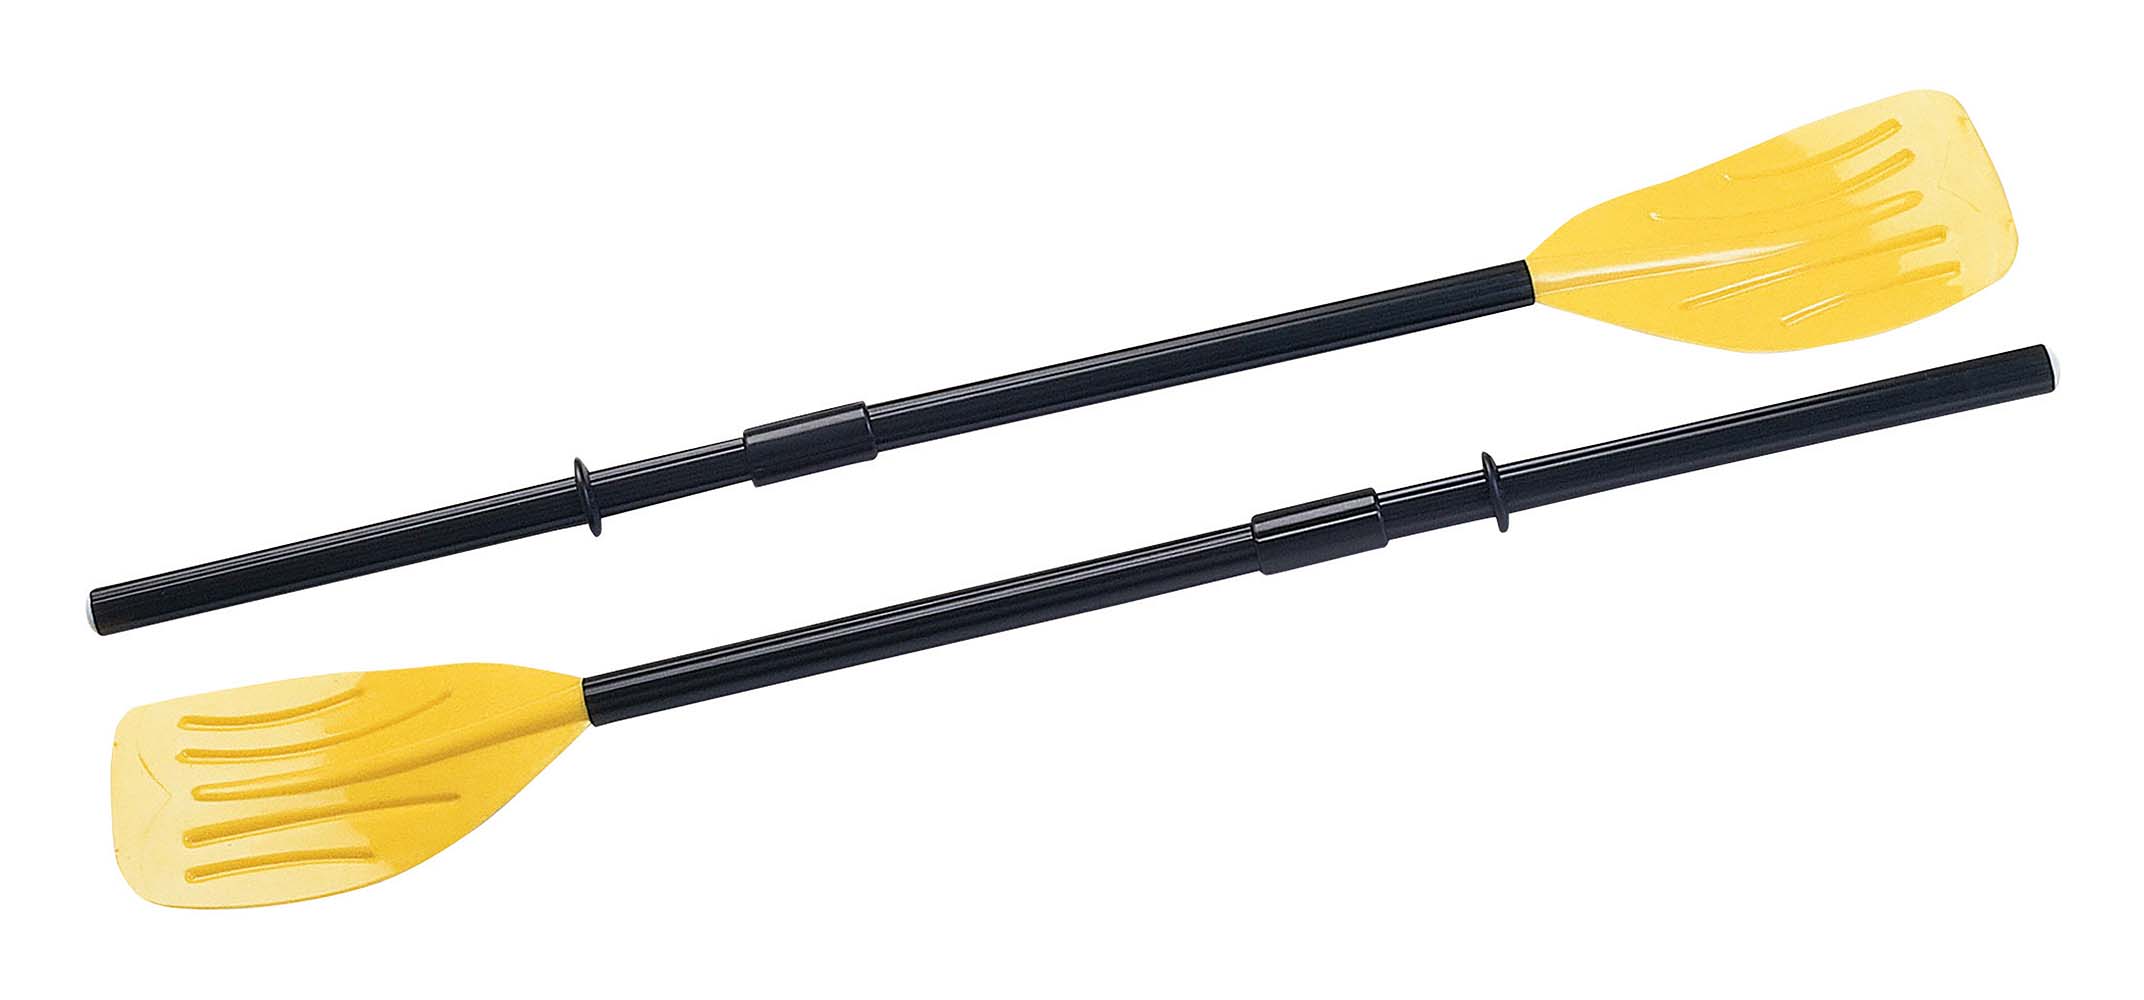 9558310 A set of 2 removable oars. The stem and leaf are divisible into three sections and have a transport length of 75 centimeters.